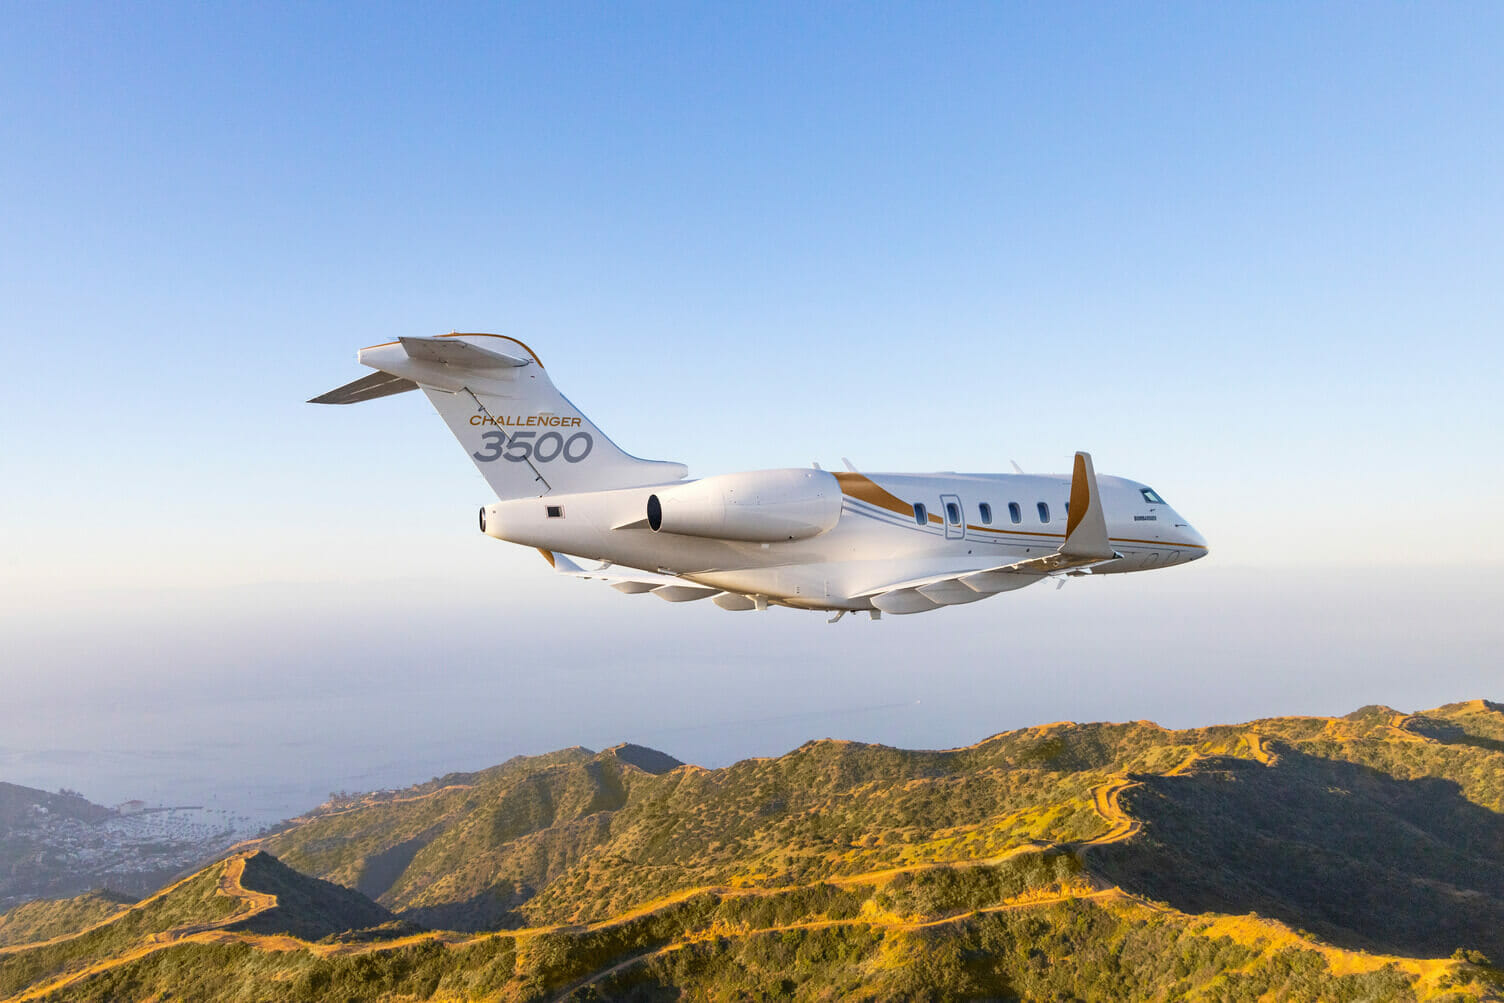 Bombardier Challenger 3500 Exterior during sunset flying over mountains